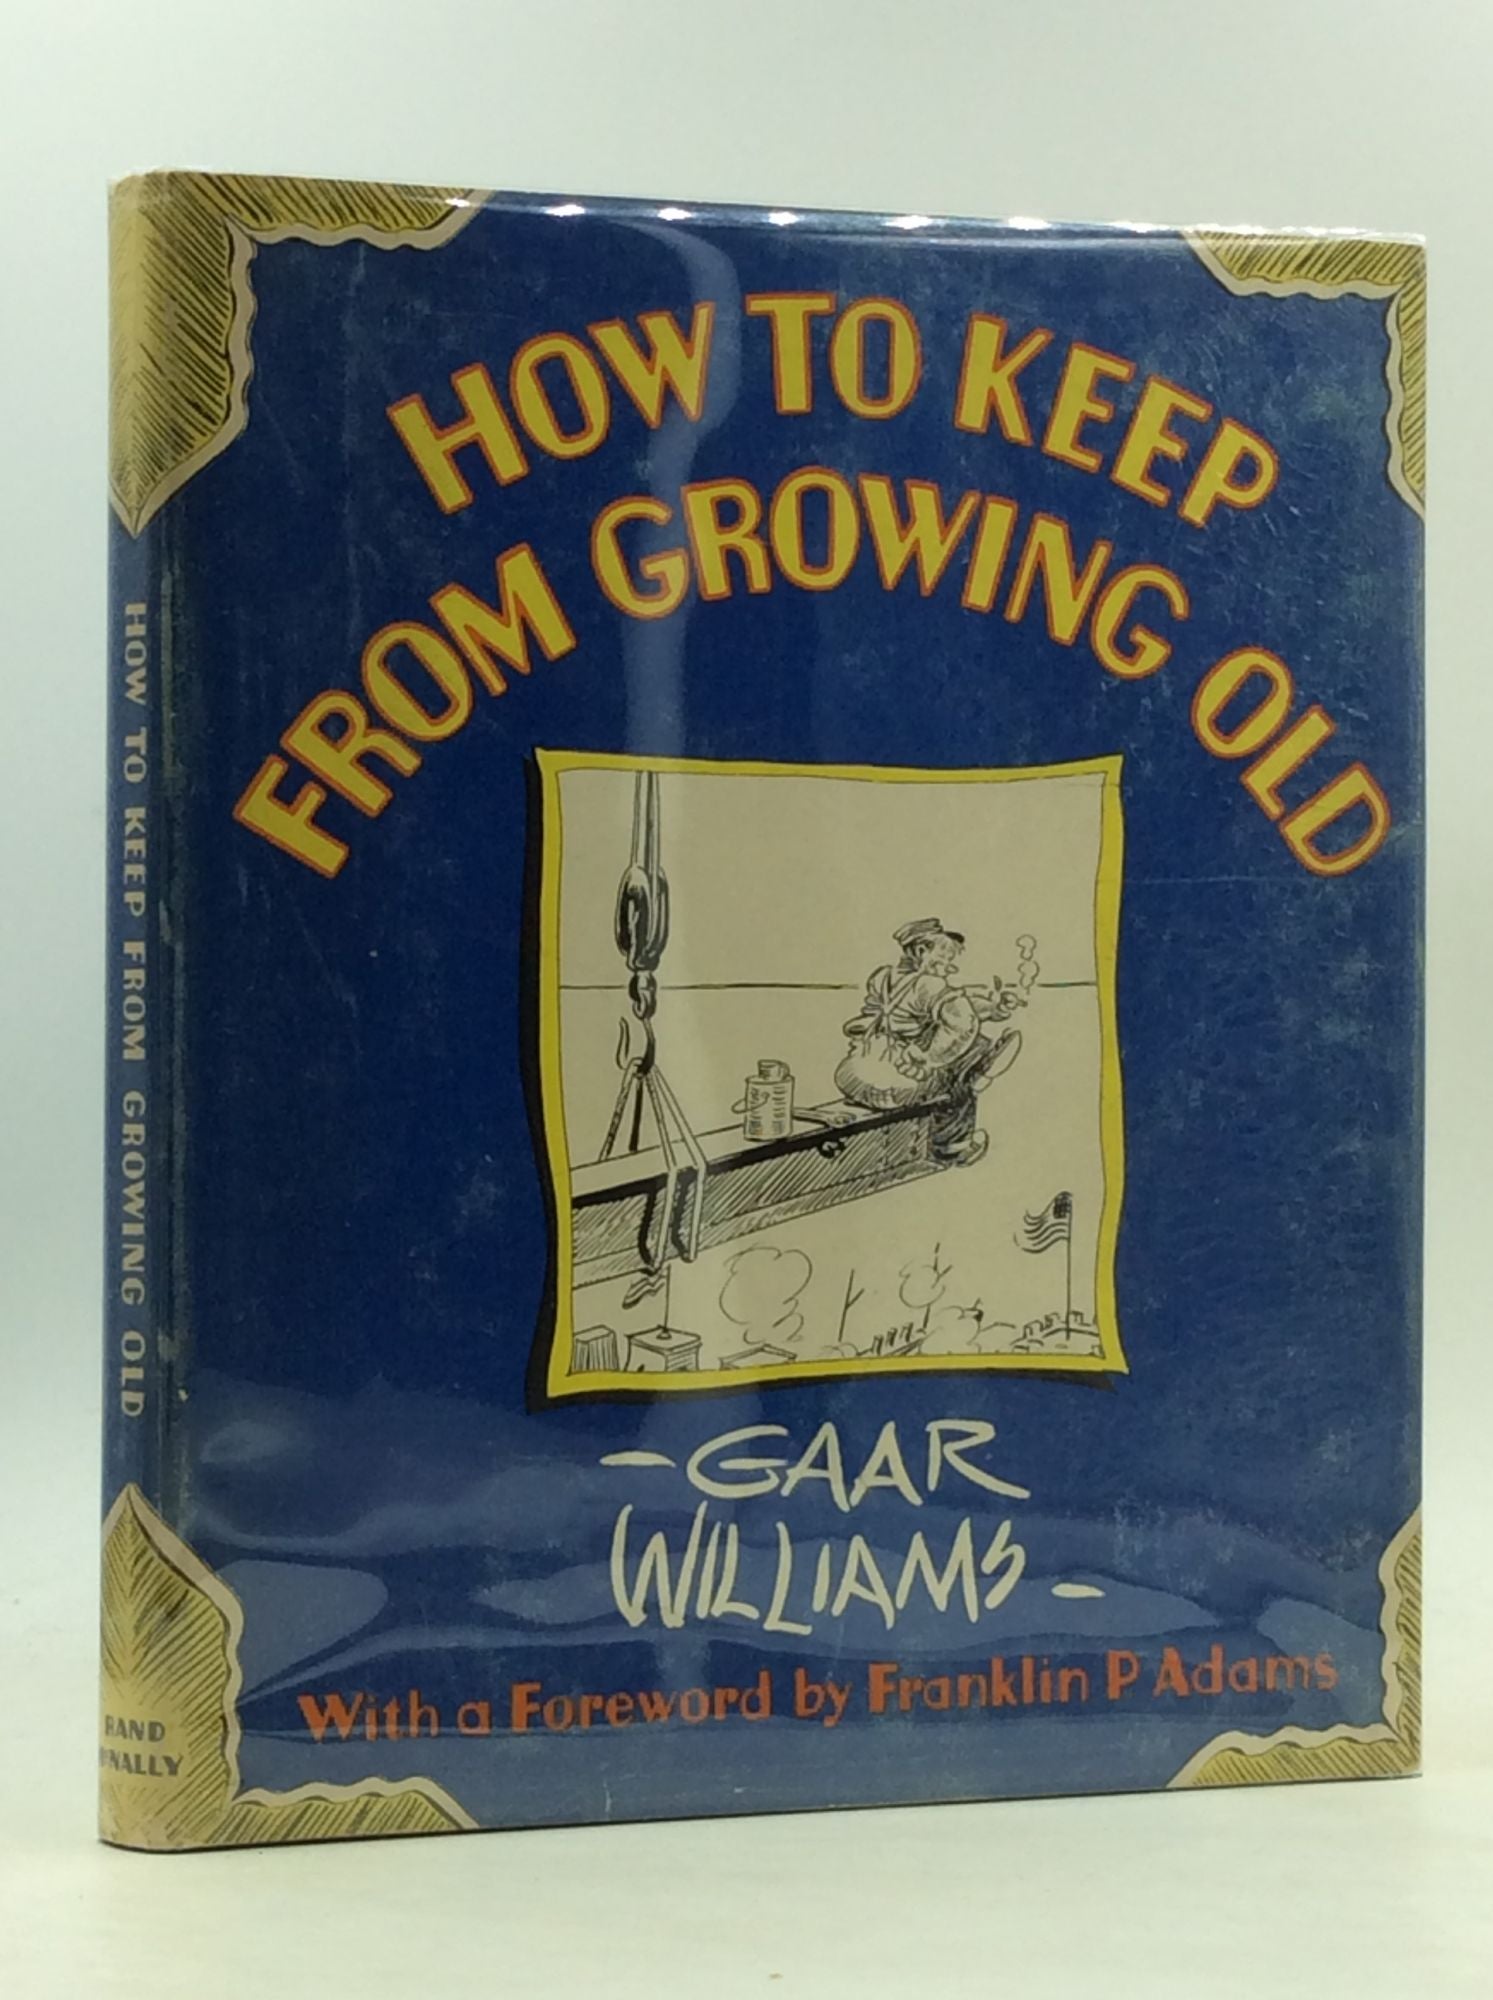 Gaar Williams - How to Keep from Growing Old